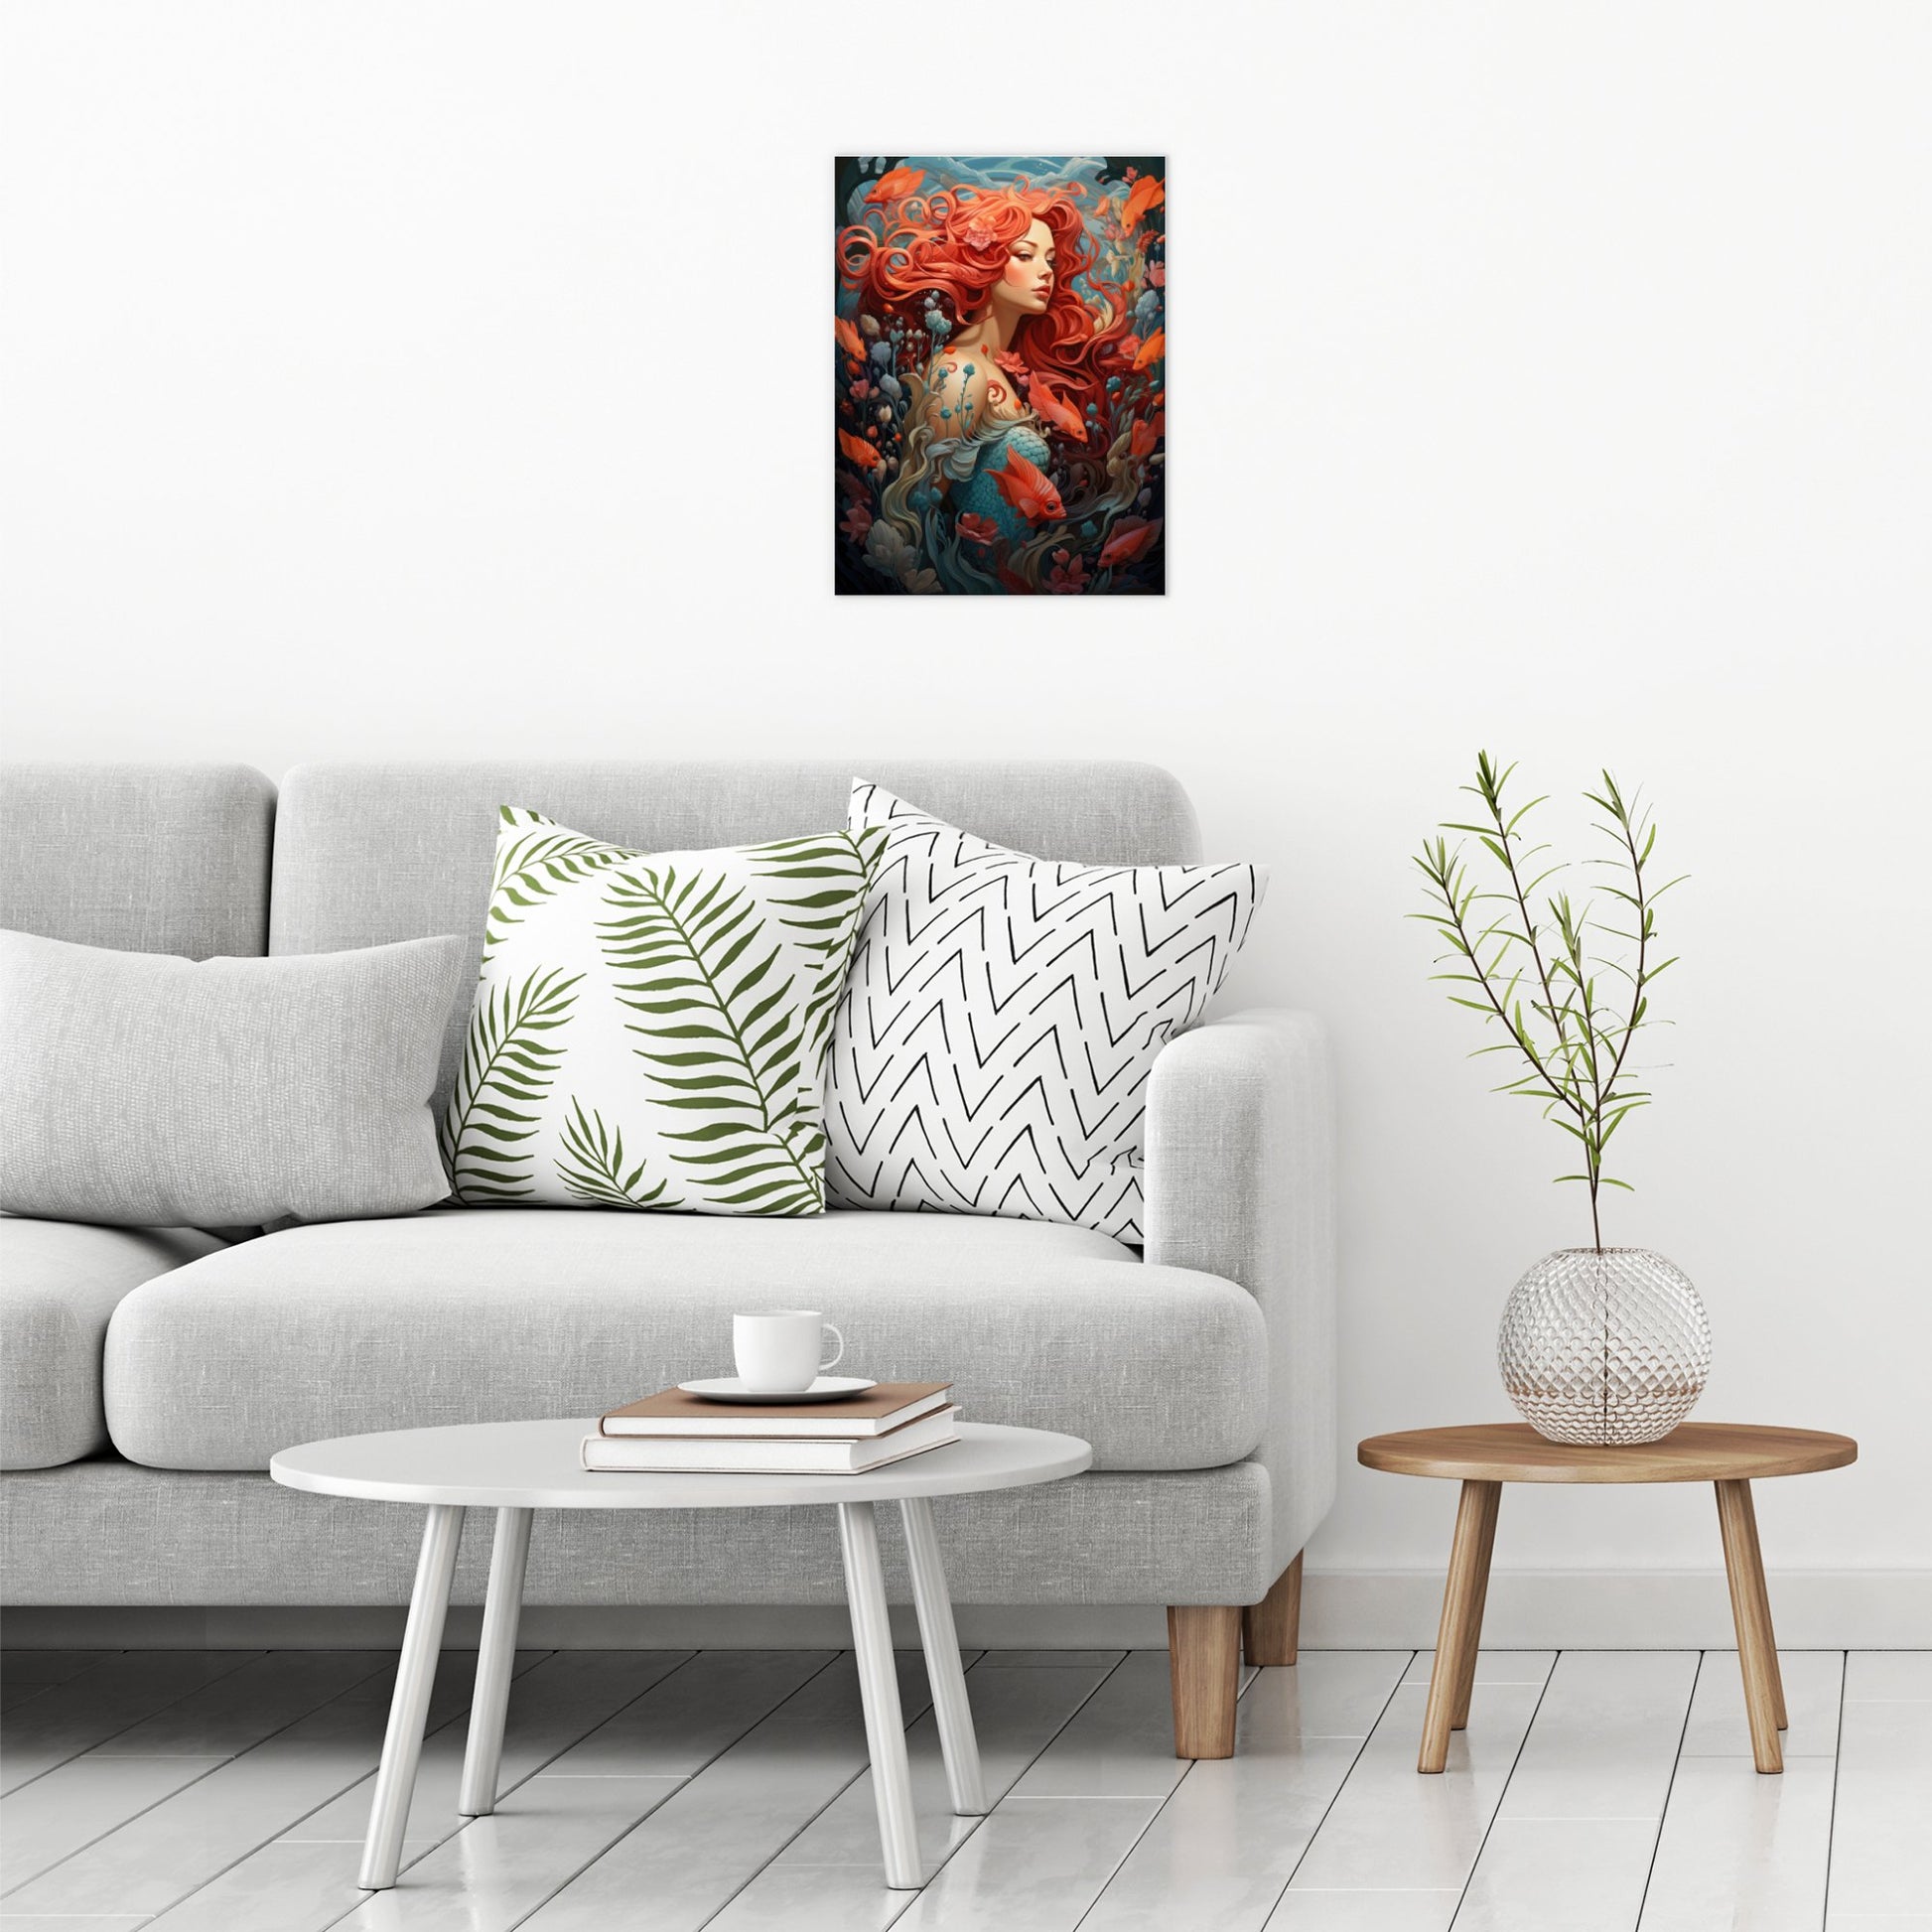 A contemporary modern room view showing a medium size metal art poster display plate with printed design of a Mermaid Fantasy Painting